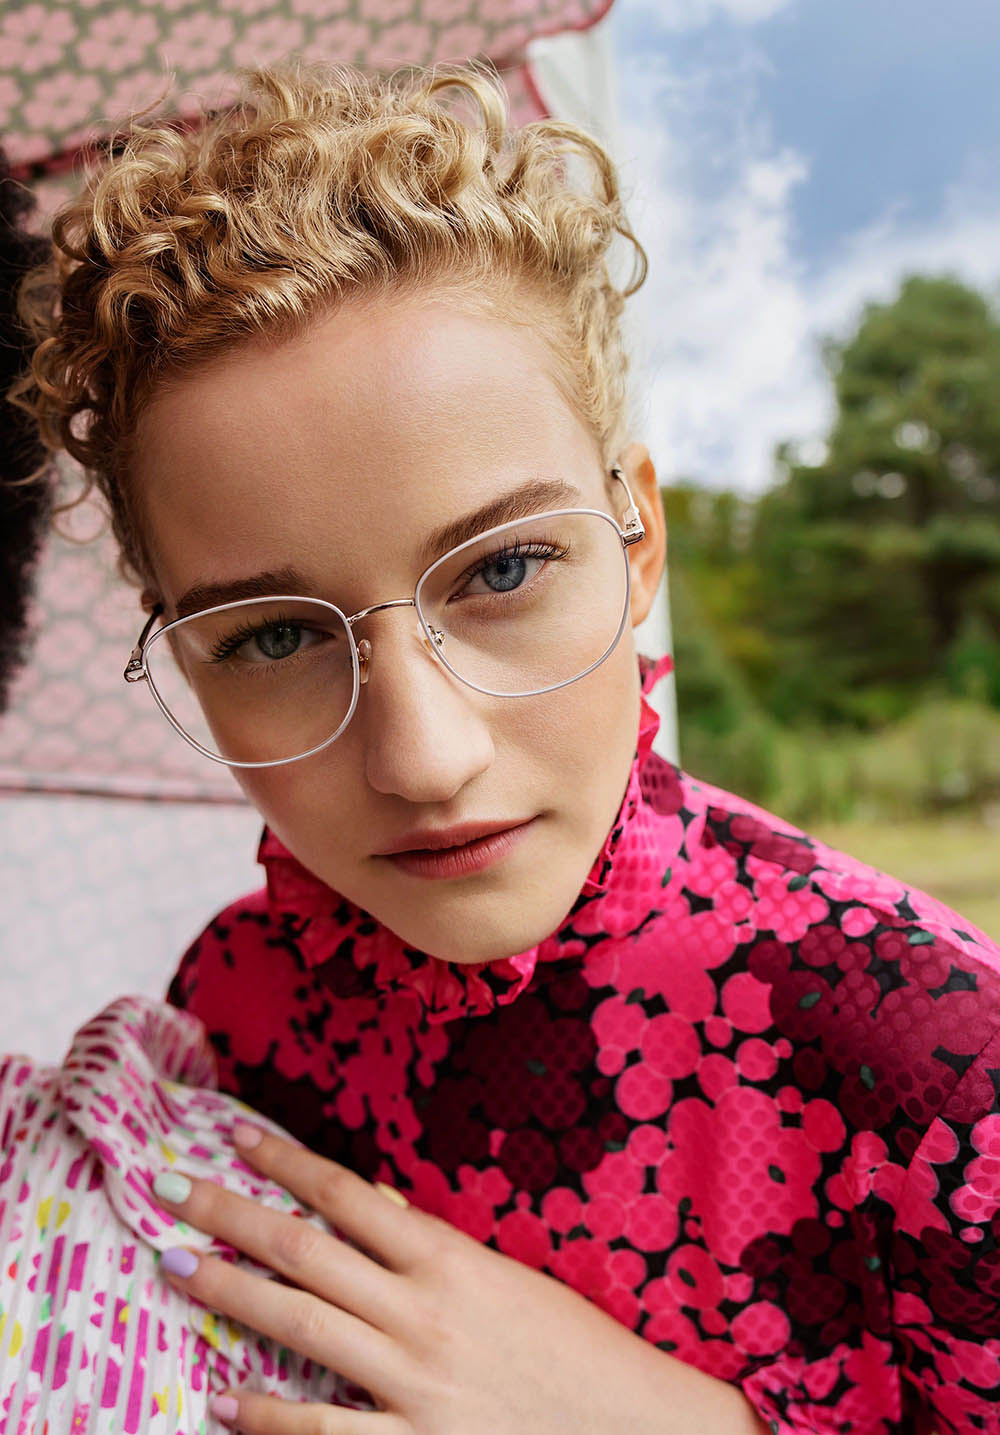 Kate Spade New York Spring Summer 2019 Campaign